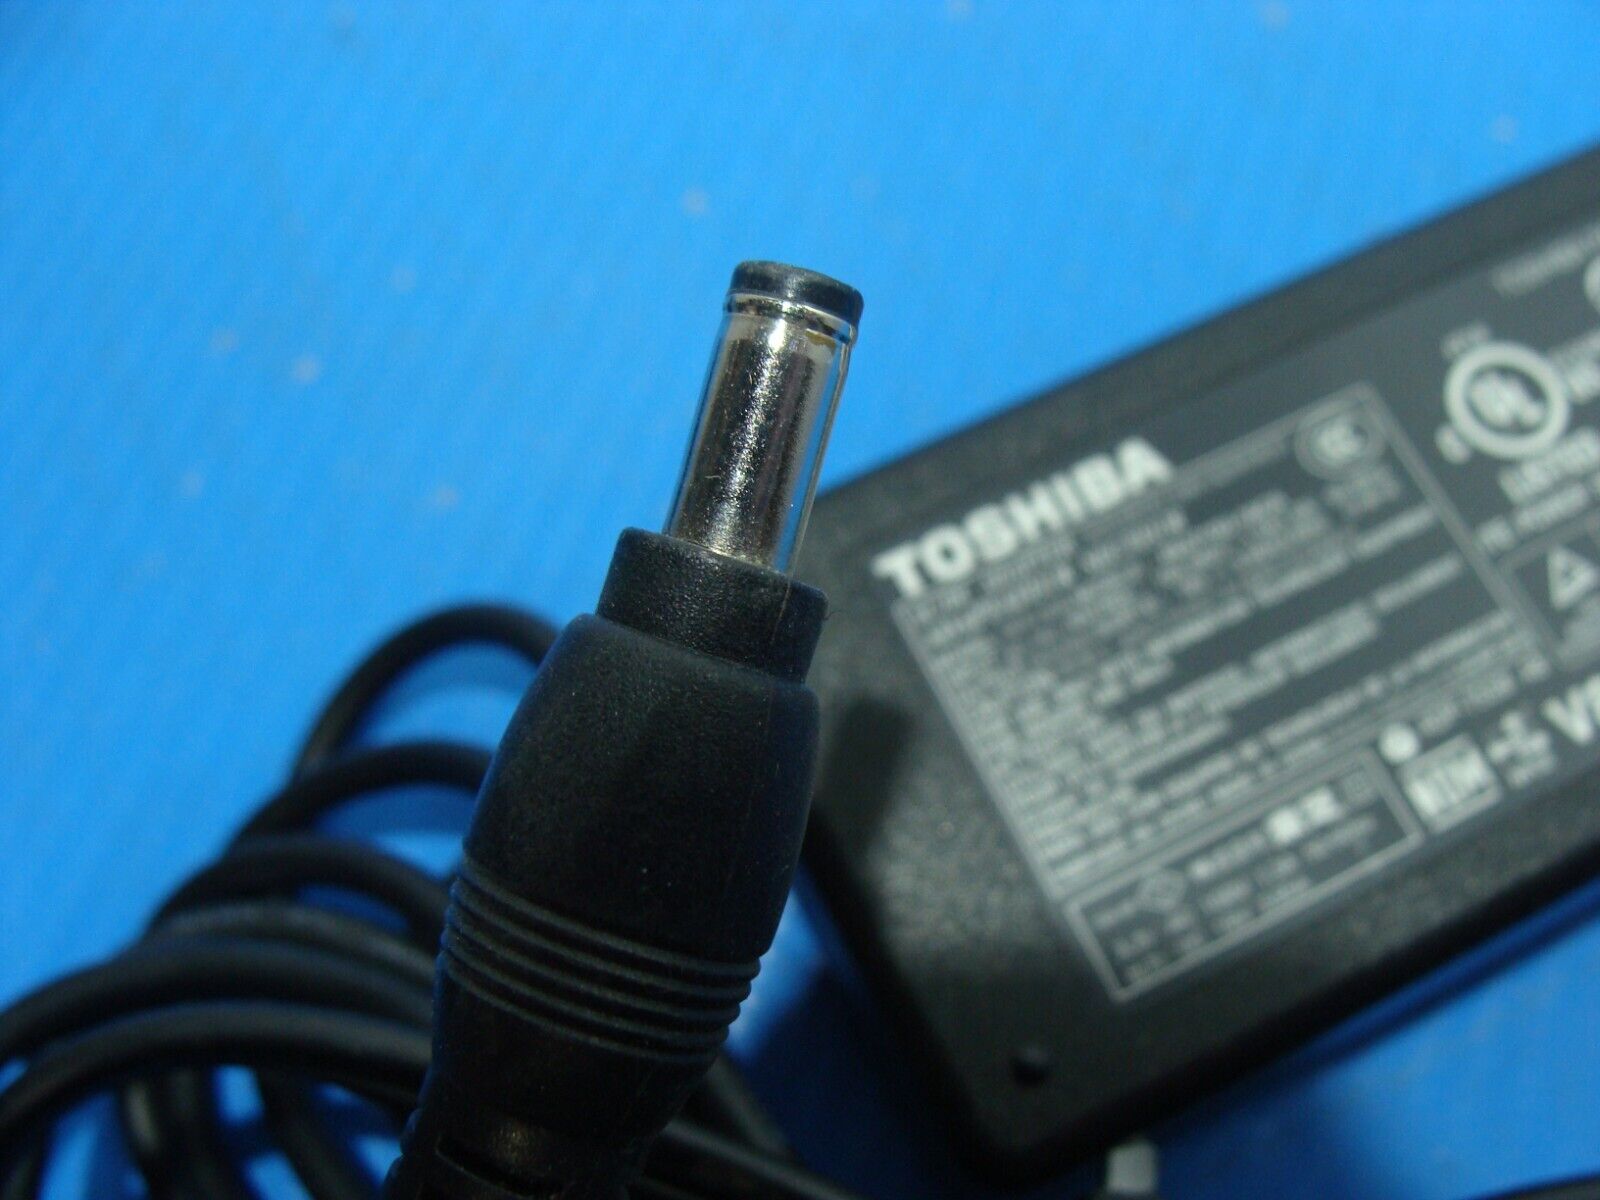 75W Genuine Toshiba Adapter Charger for Toshiba L755-S5257 L755-S5255 L755-S5242